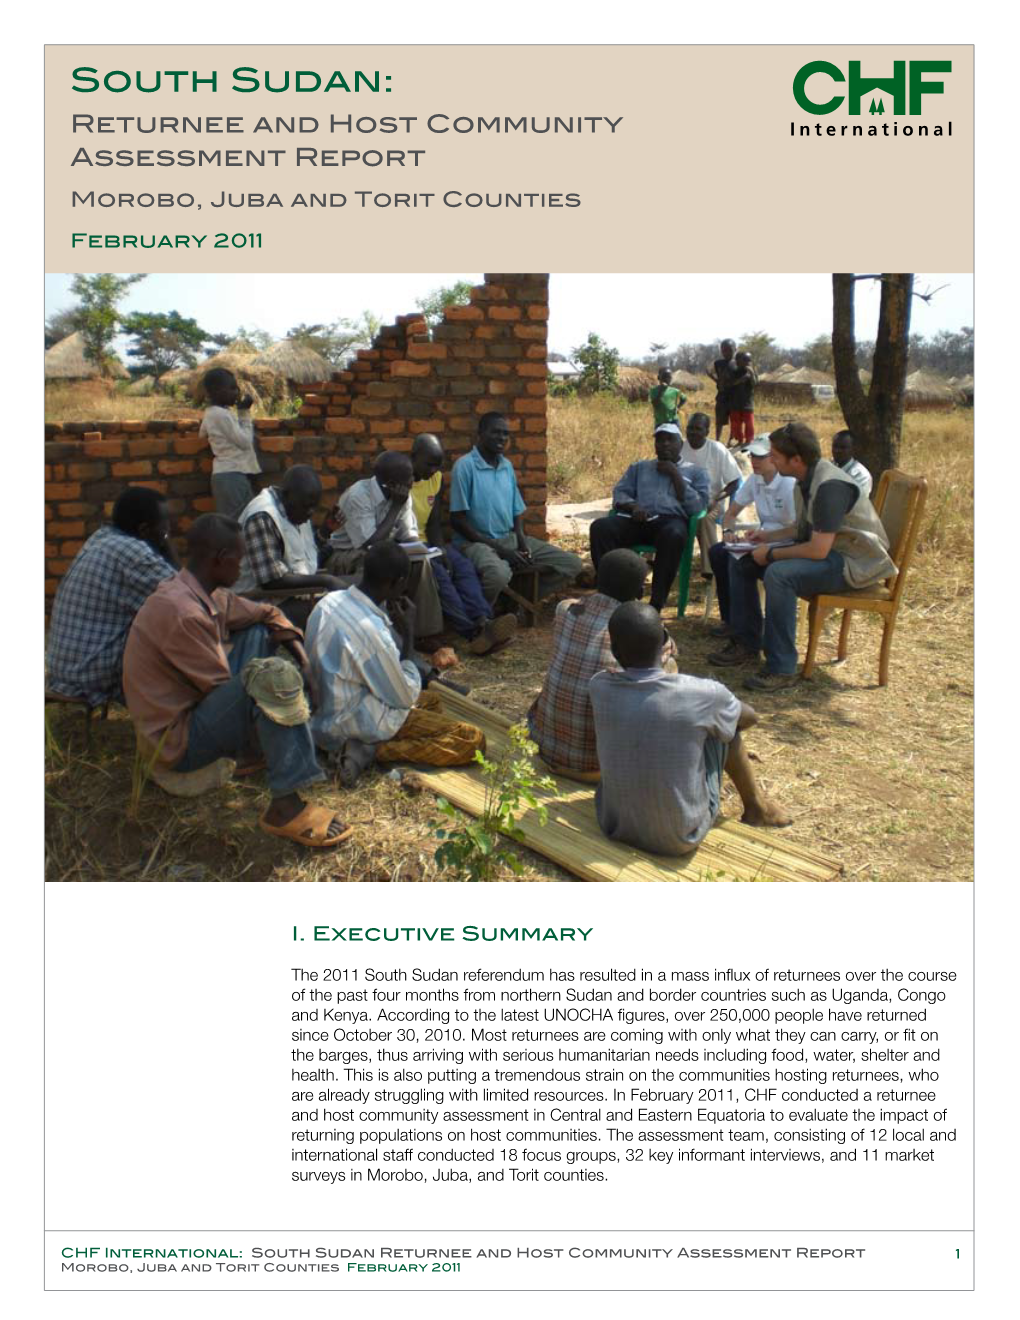 South Sudan: Returnee and Host Community Assessment Report Morobo, Juba and Torit Counties